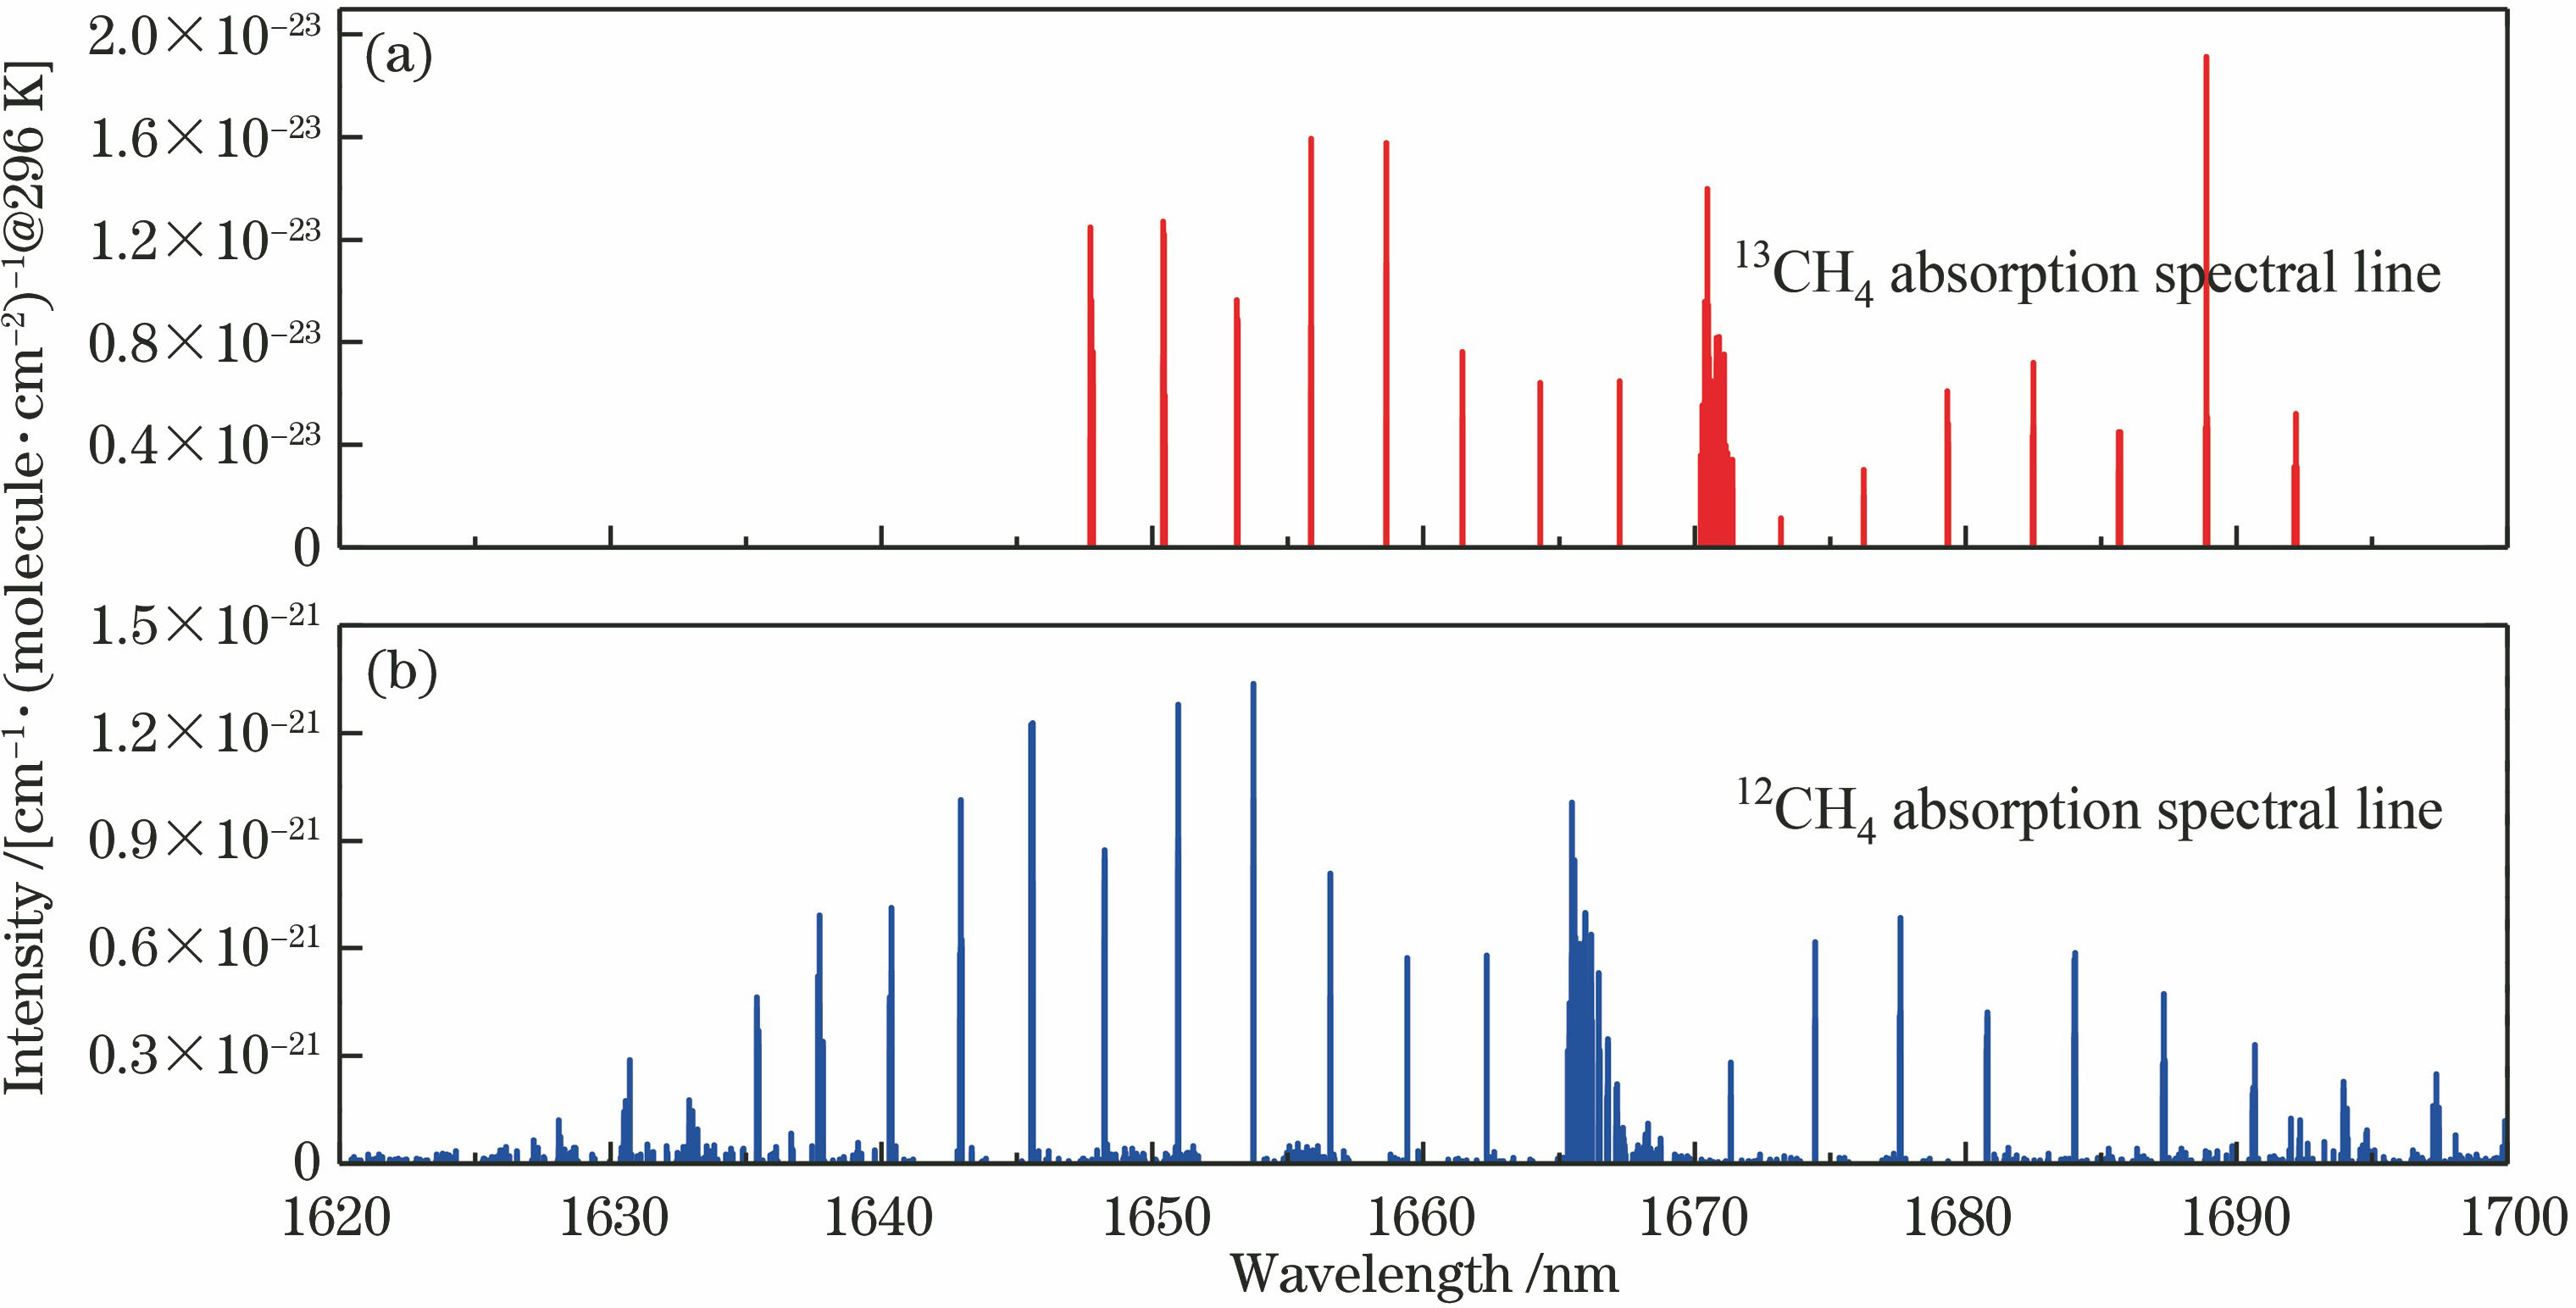 Spectral line intensities of methane carbon isotope at different wavelengths in HITRAN database. (a) 13CH4; (b) 12CH4